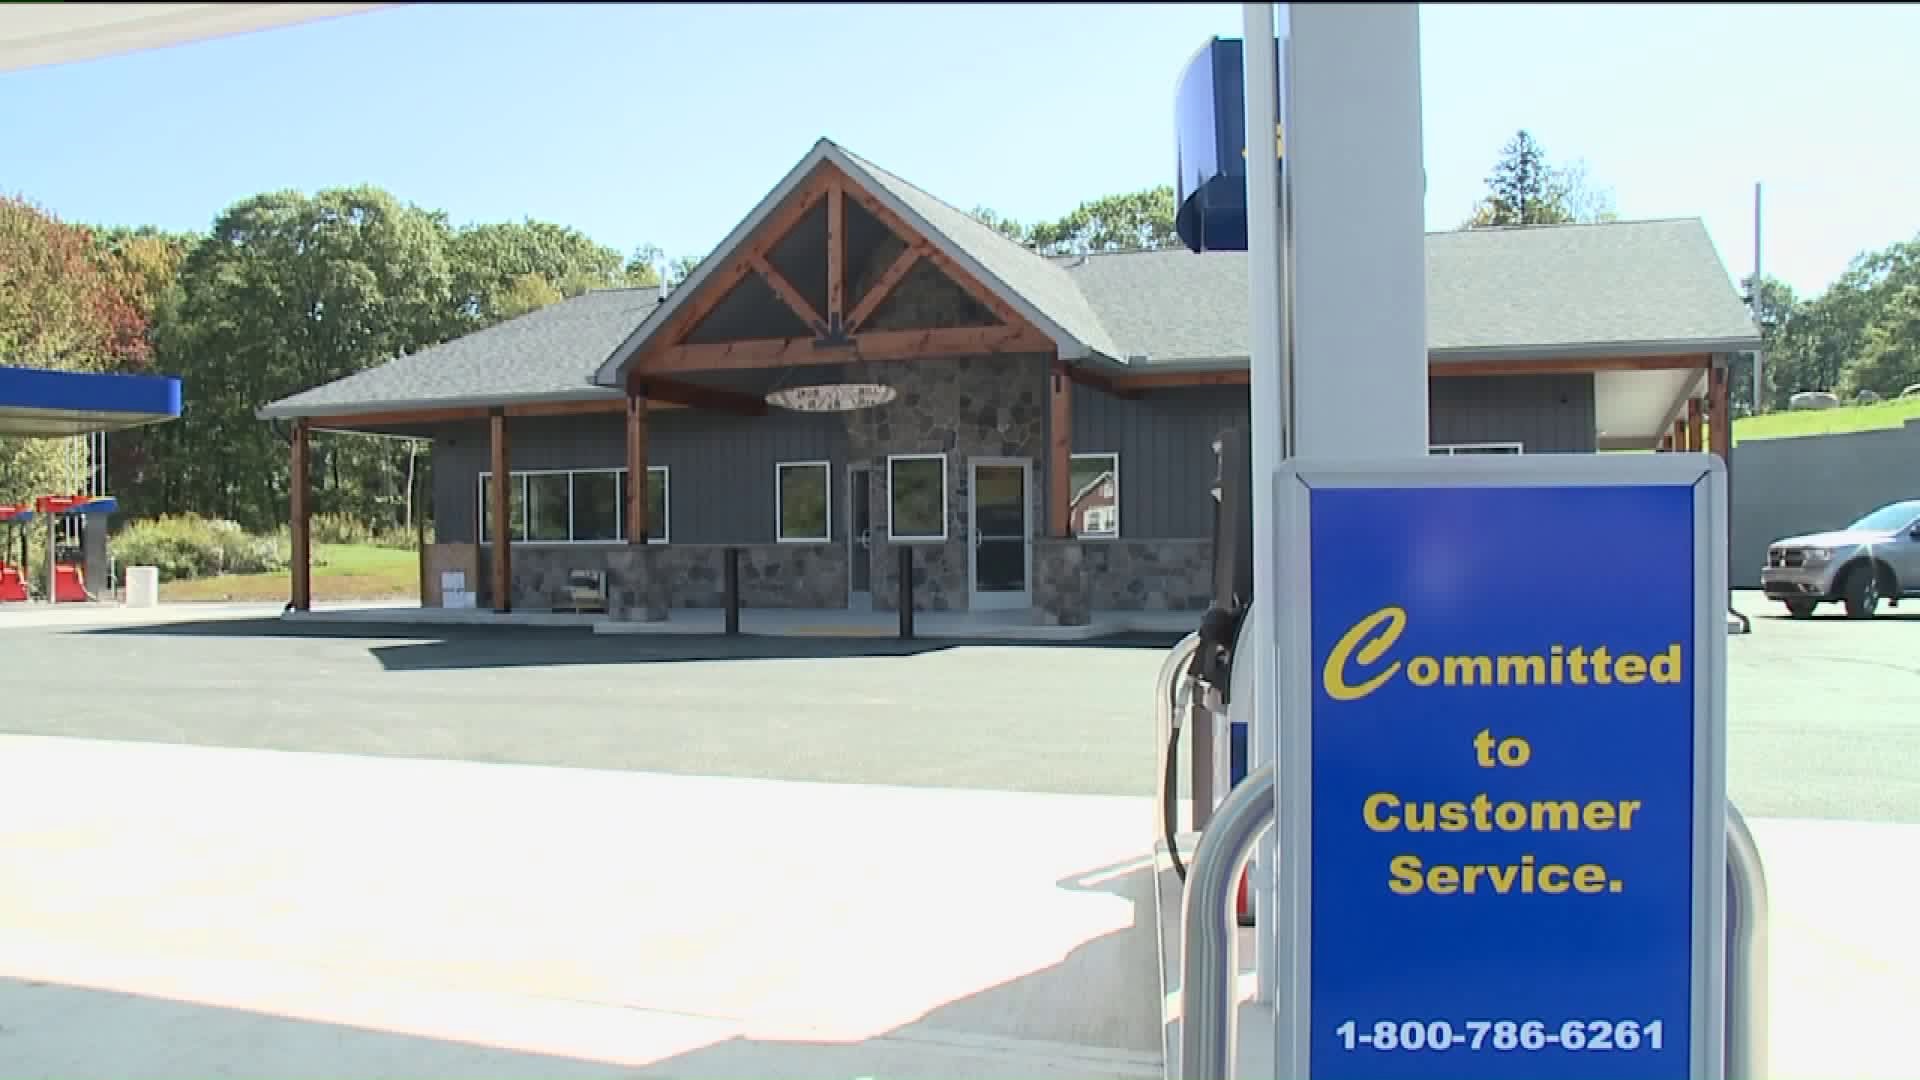 New Business in Wayne County Set to Open